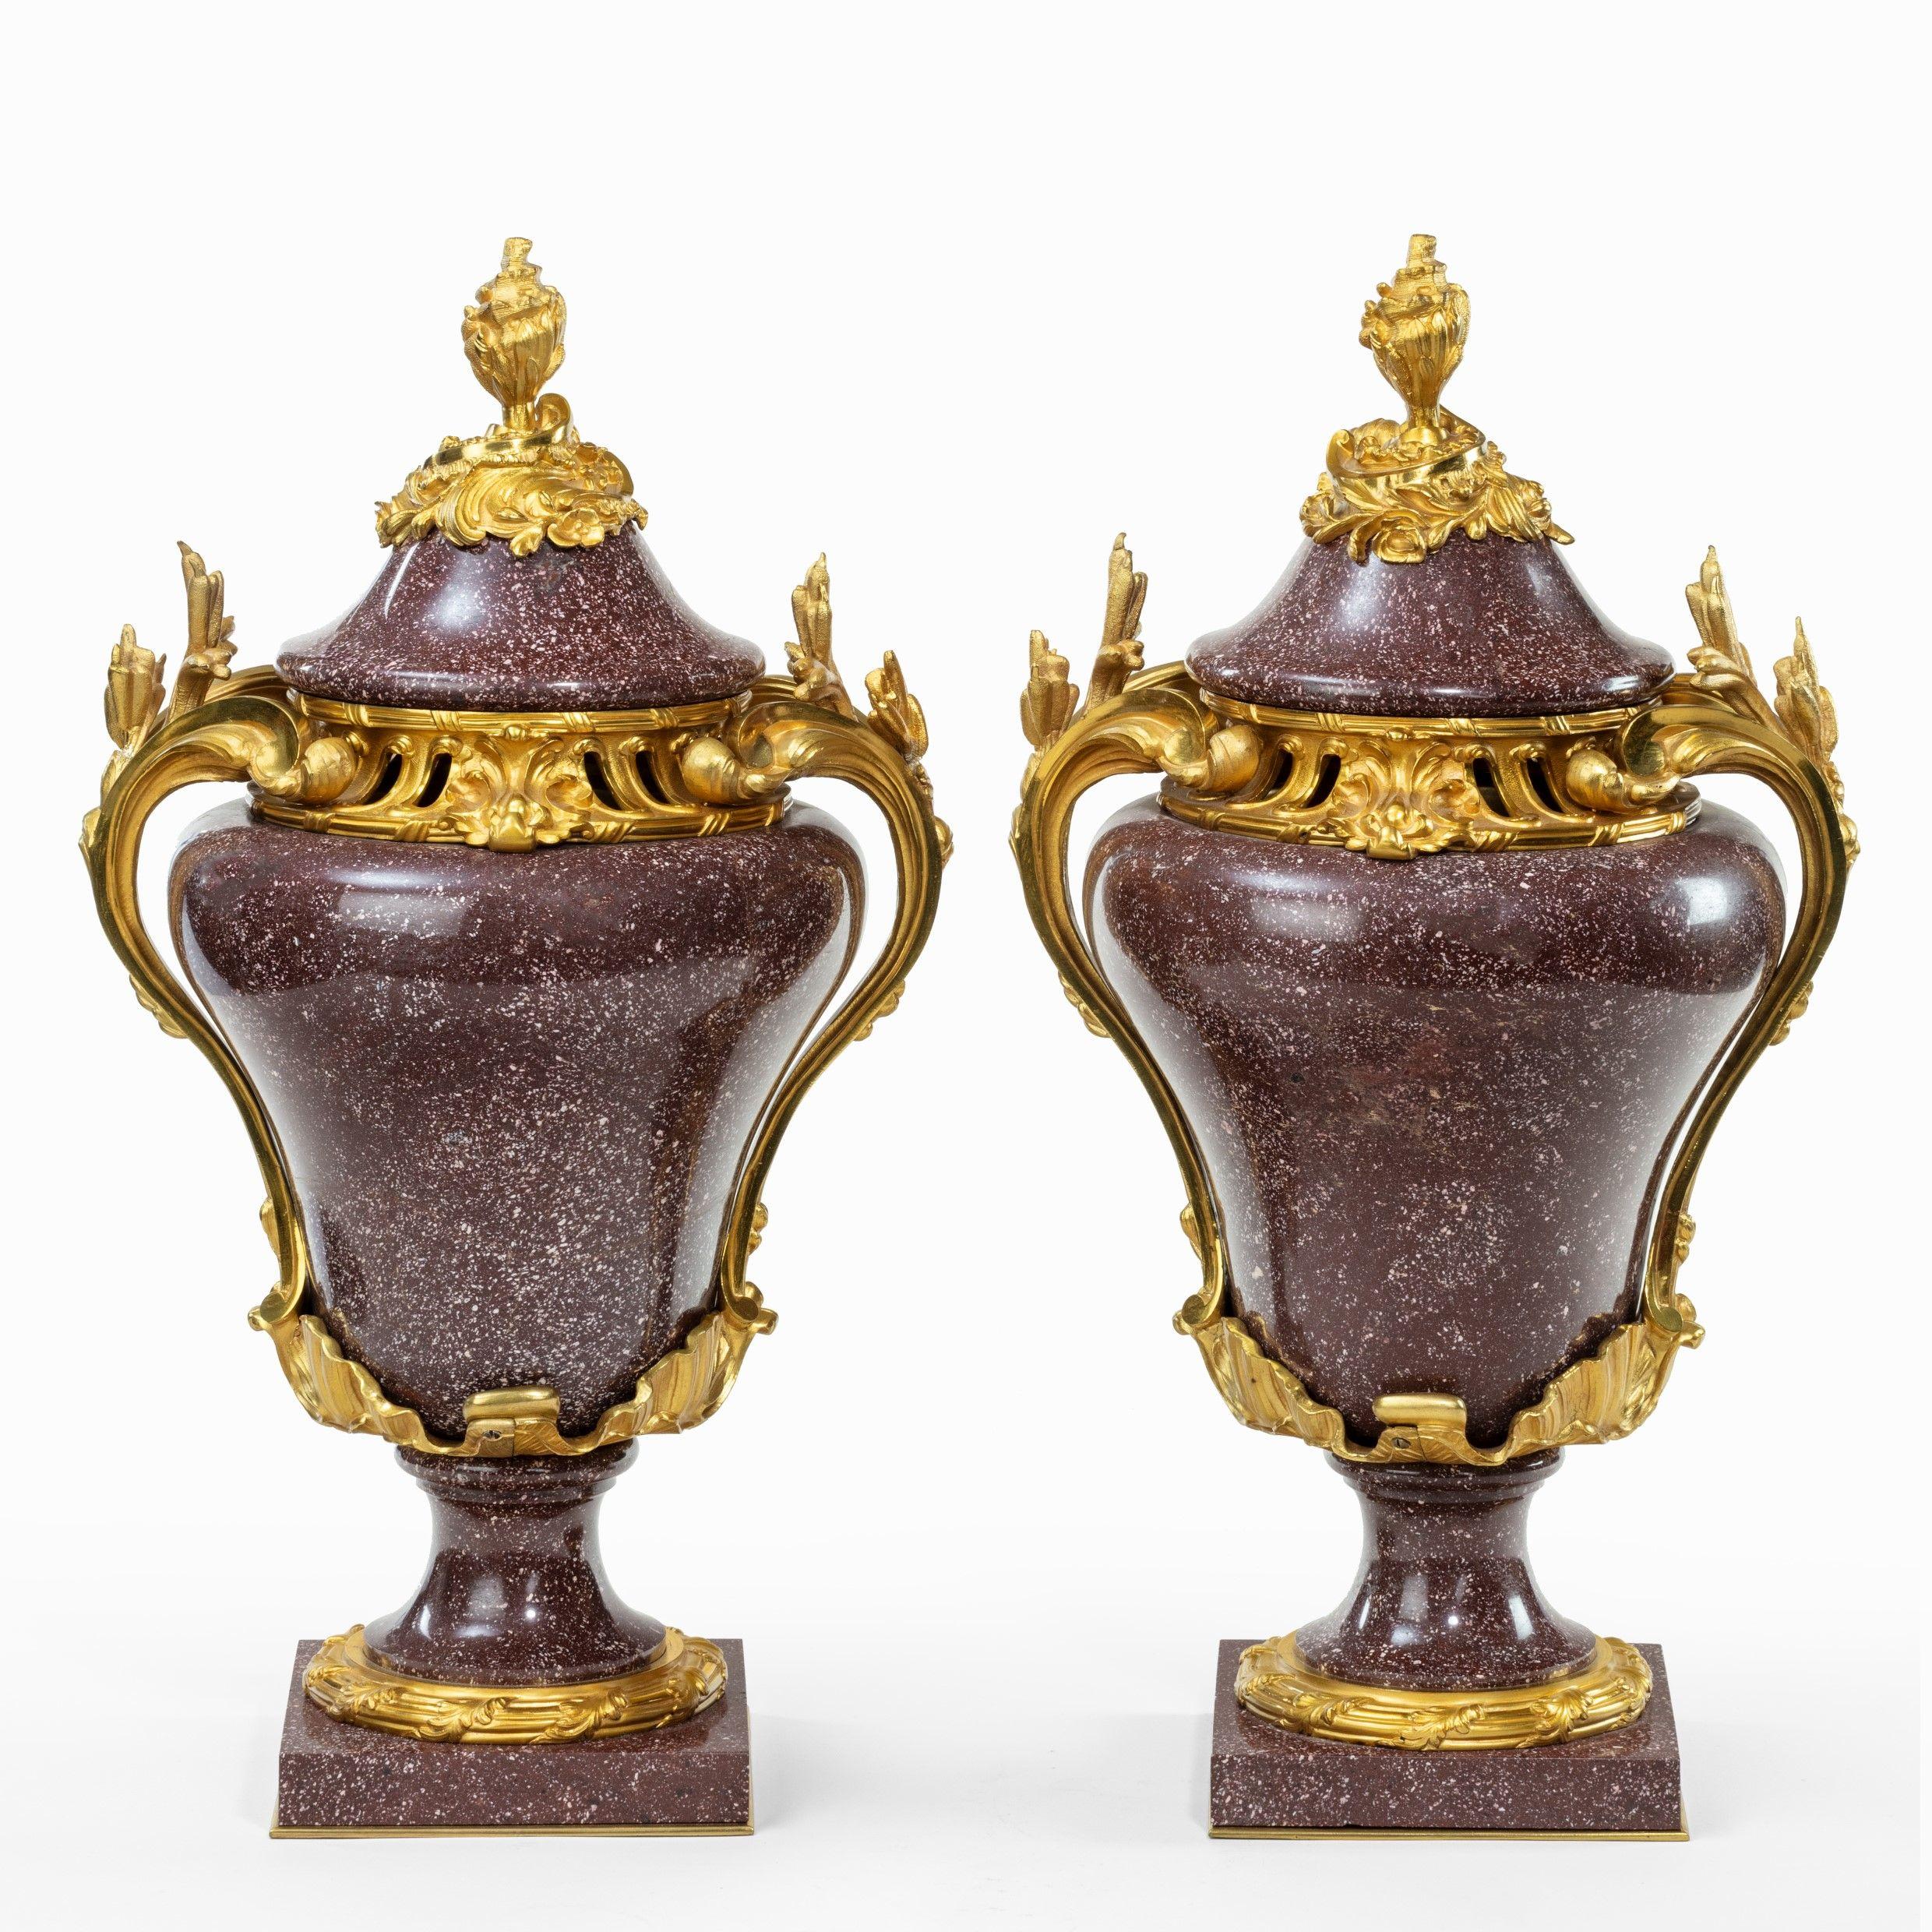 A pair Napoleon III Egyptian imperial porphyry urns and covers, each with a shaped cover and baluster body on a concave support and square base, applied with high quality ormolu mounts comprising a flower-bud finial, arched foliate handles, an